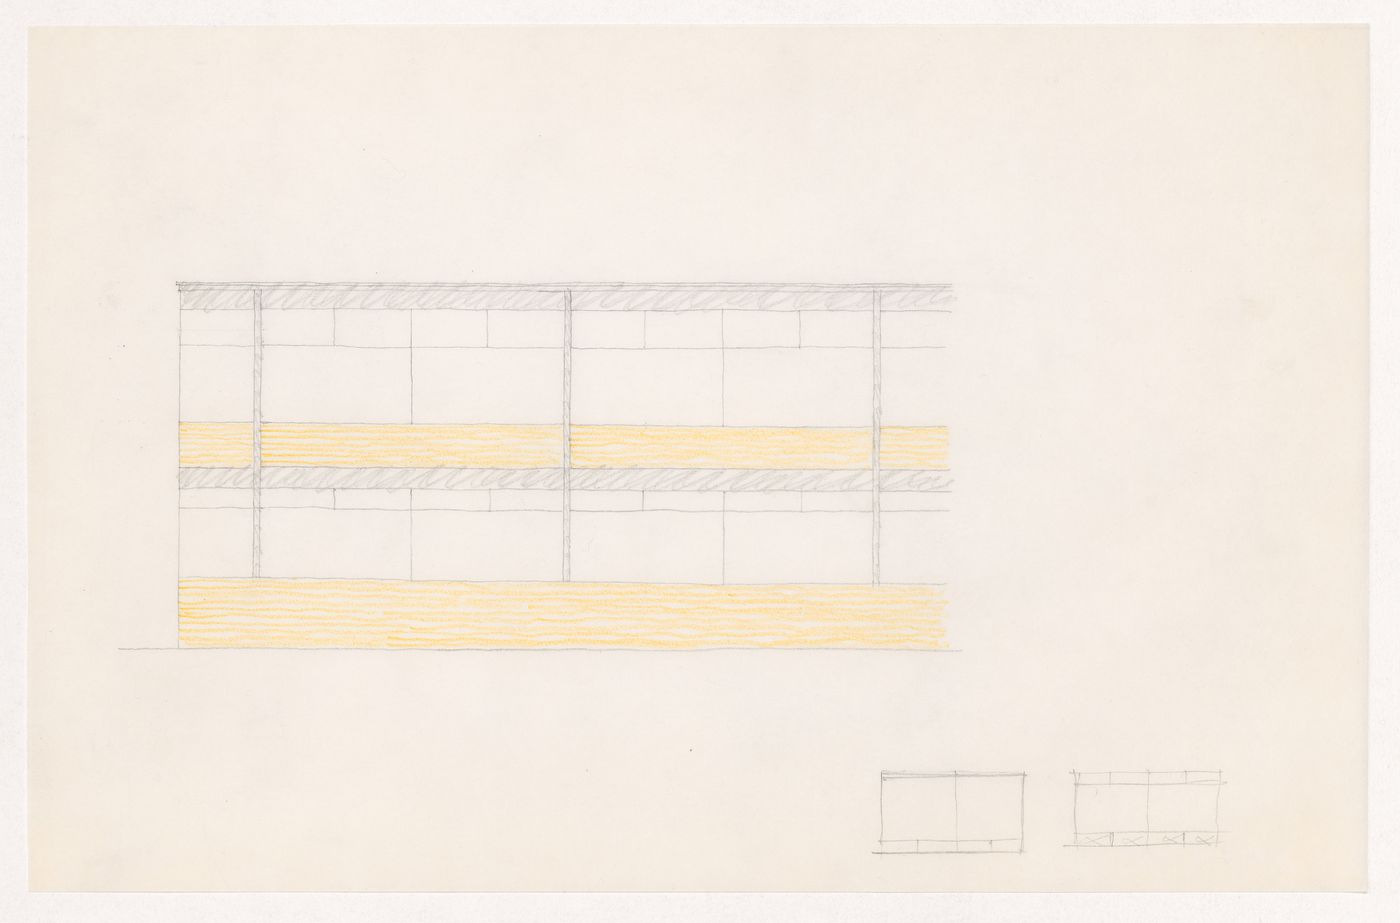 Partial sketch elevation for the Metallurgy Building, Illinois Institute of Technology, Chicago, with small sketch elevations for double windows